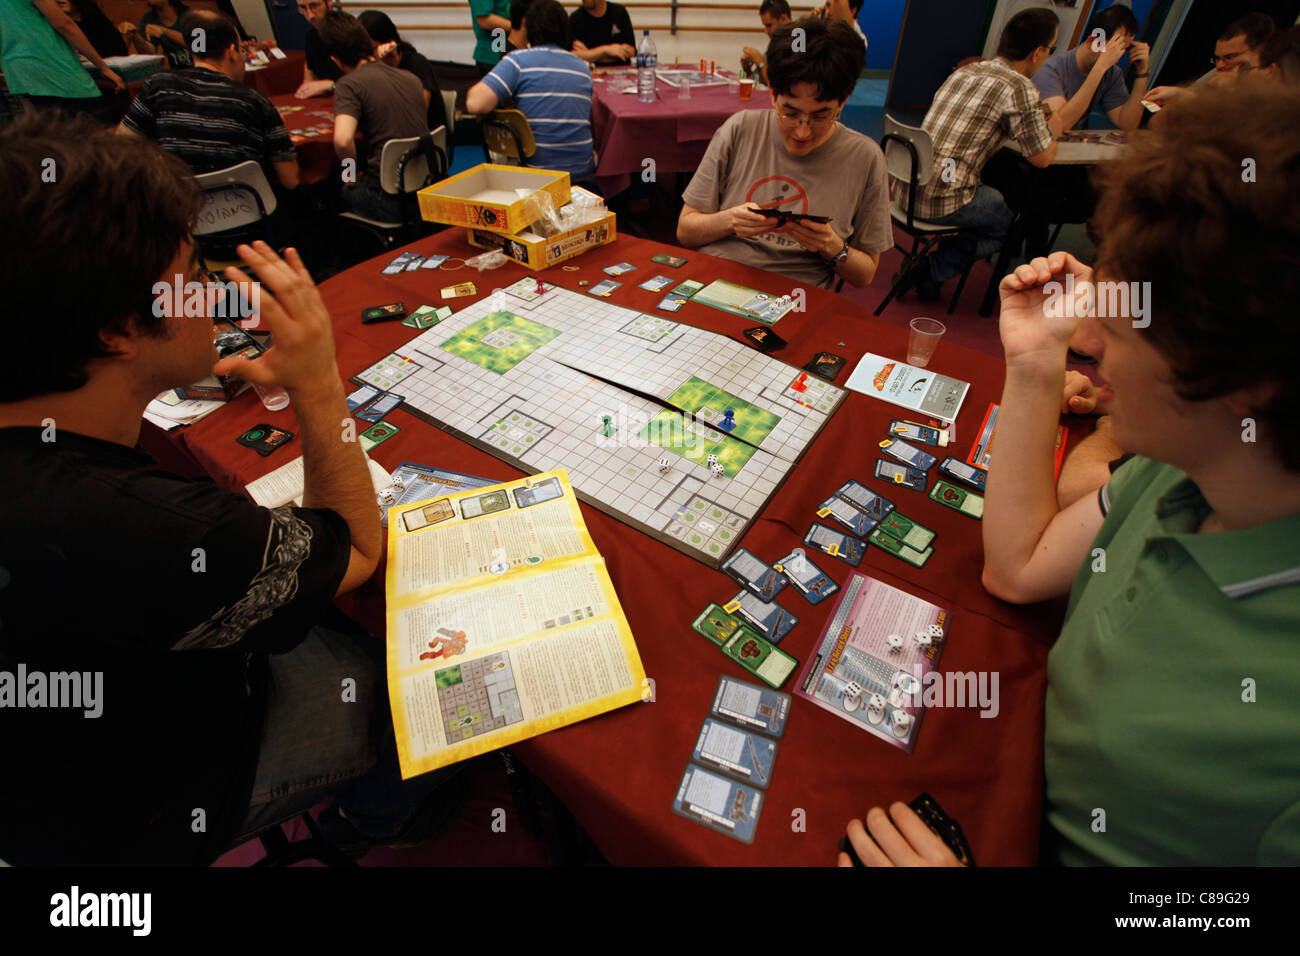 Gamers in Frag role-playing game (RPG) session Stock Photo